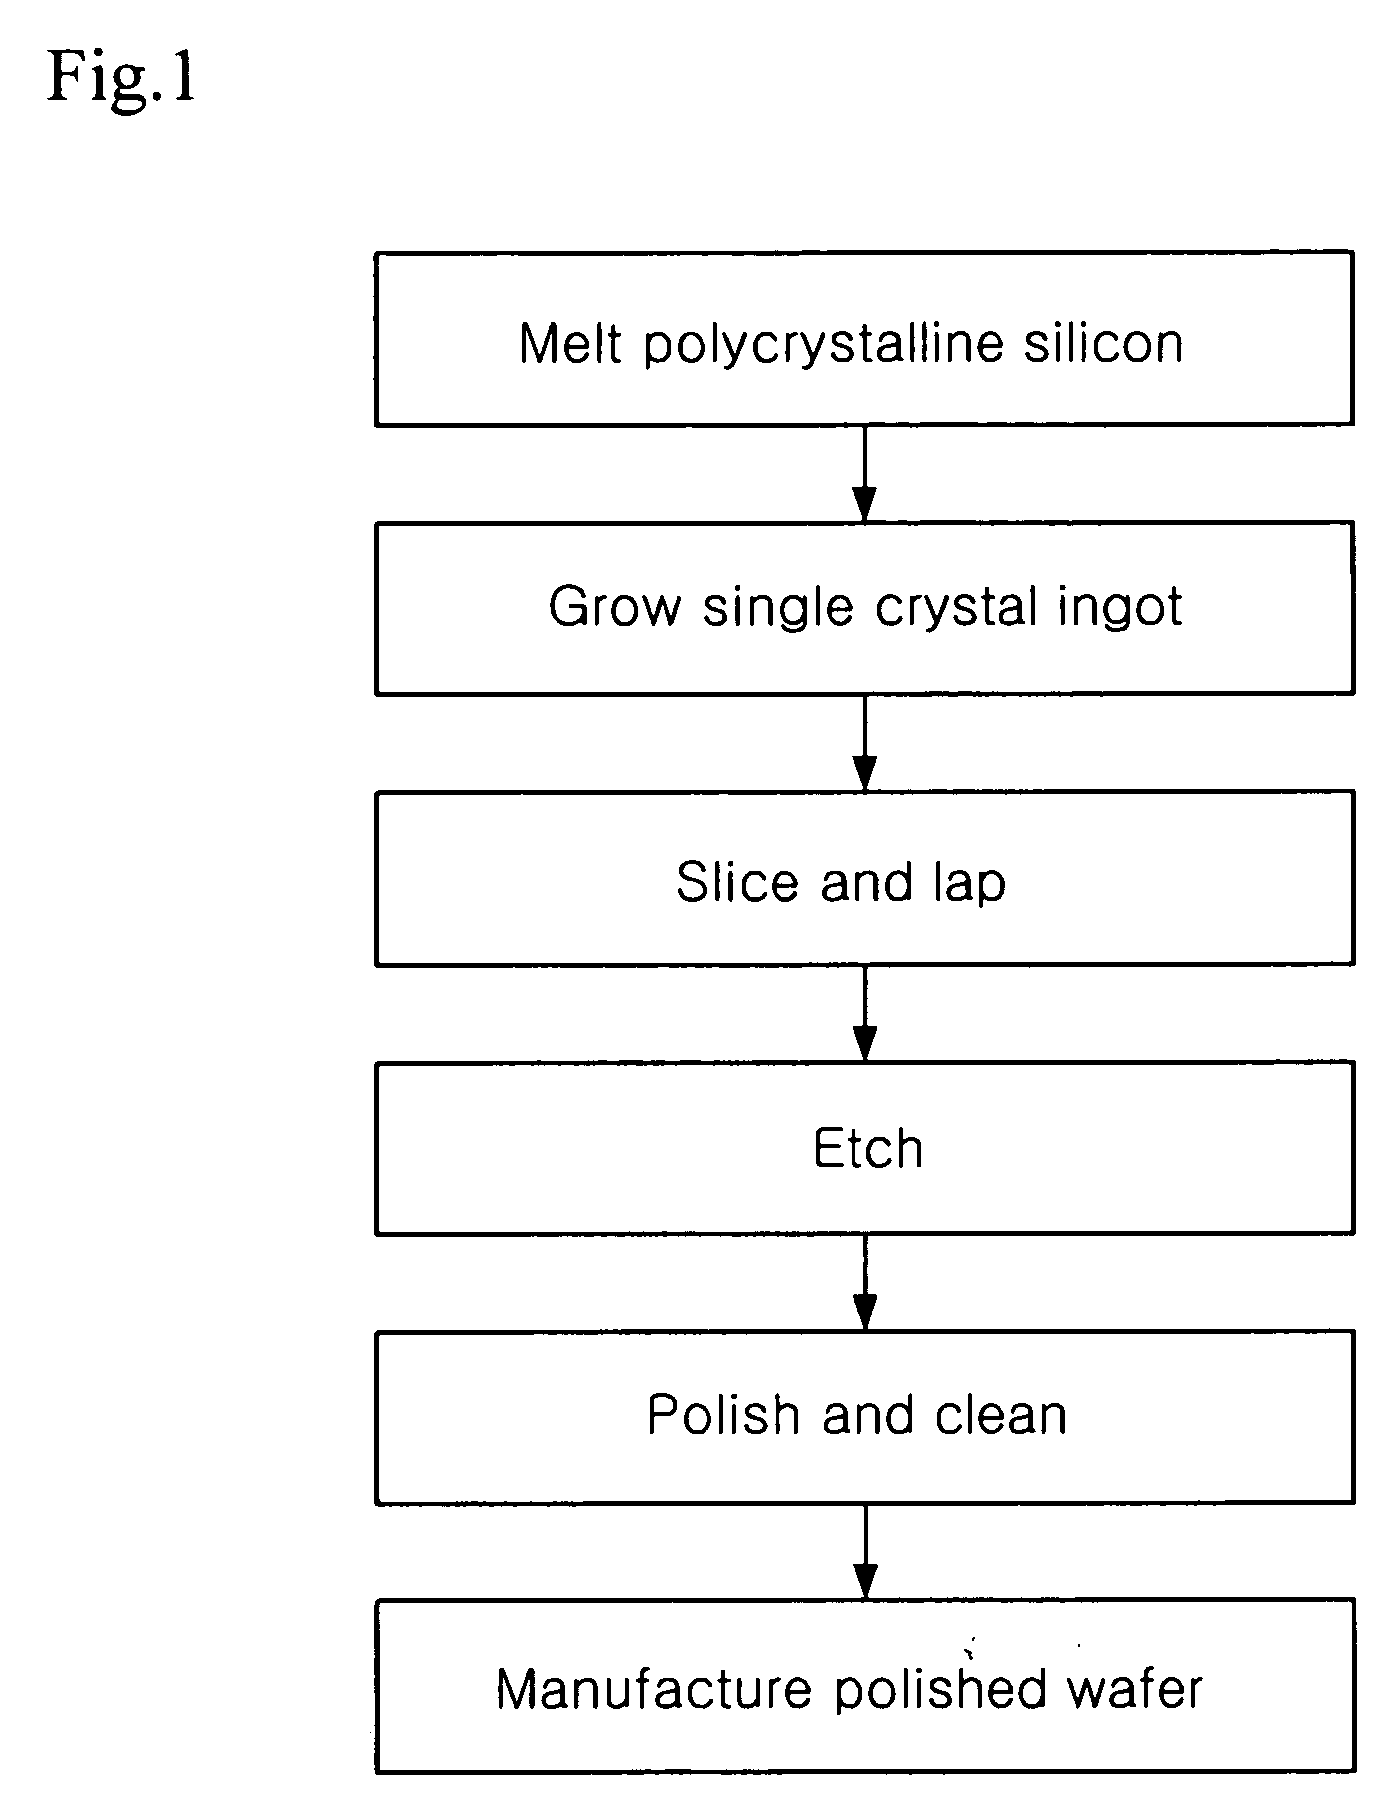 Gallium nitride semiconductor and method of manufacturing the same